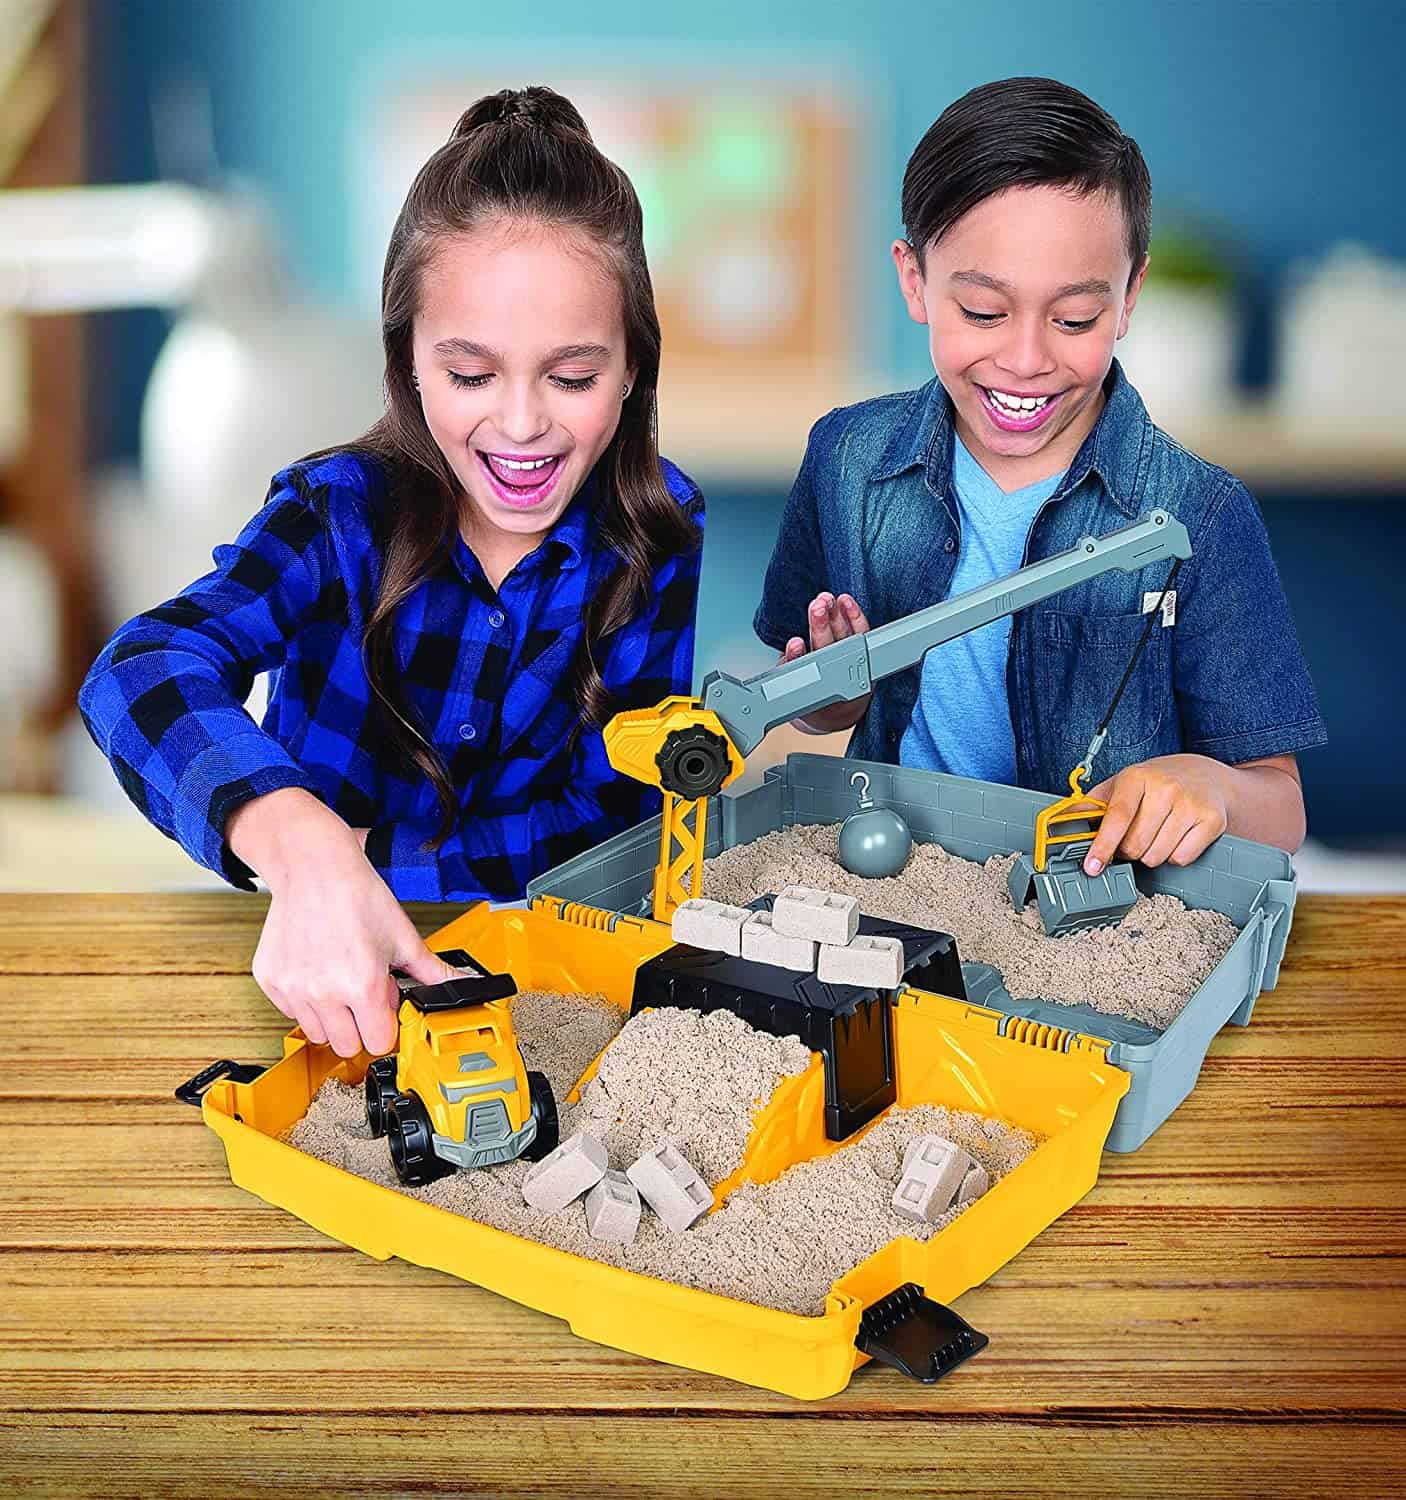 Best toy construction site with kinetic sand- Kinetic Sand Construction site